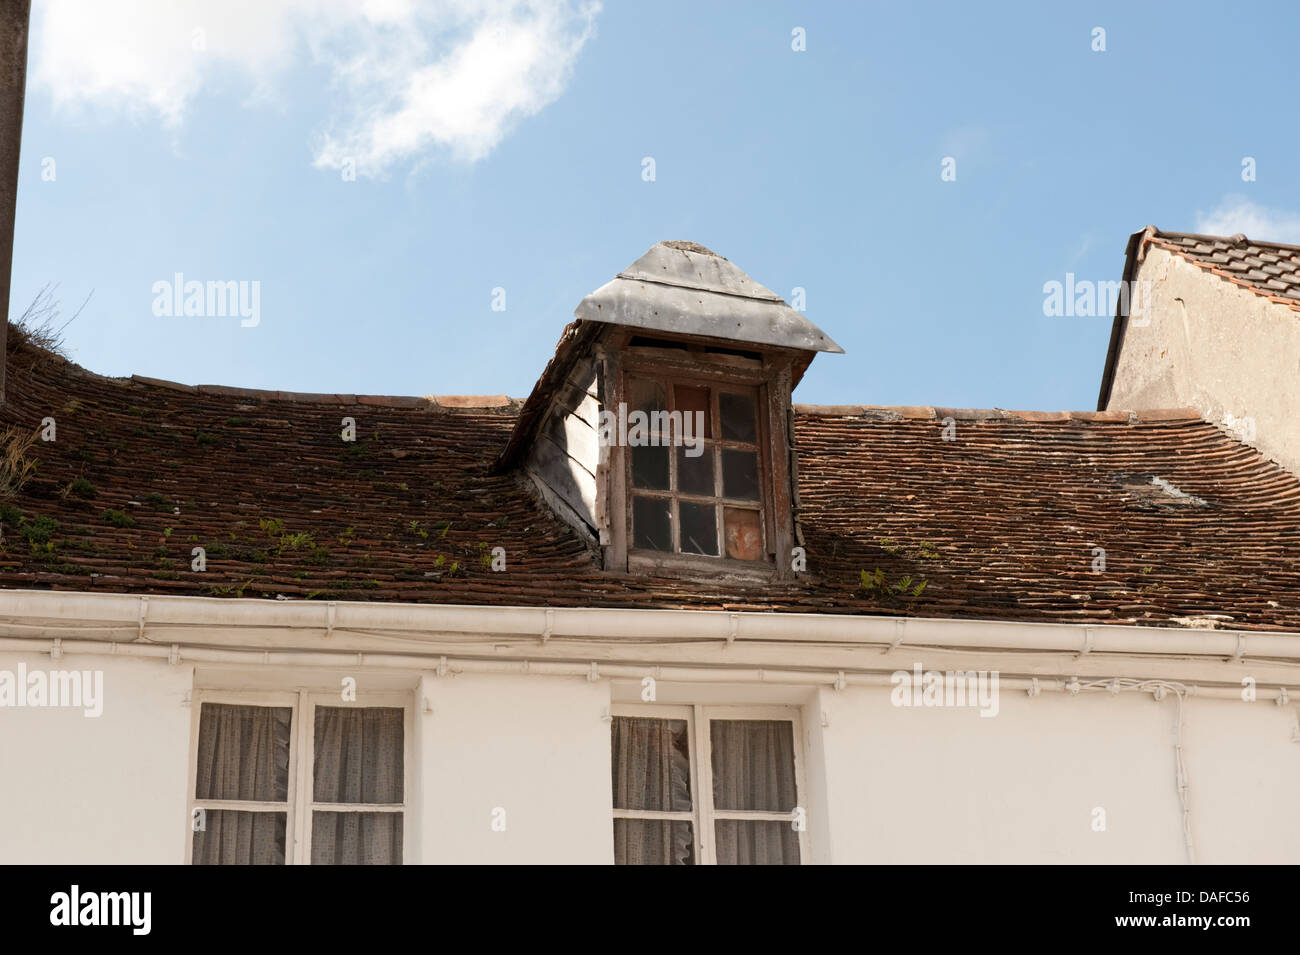 Old weathered dilapidated dormer roof Montreuil France Stock Photo